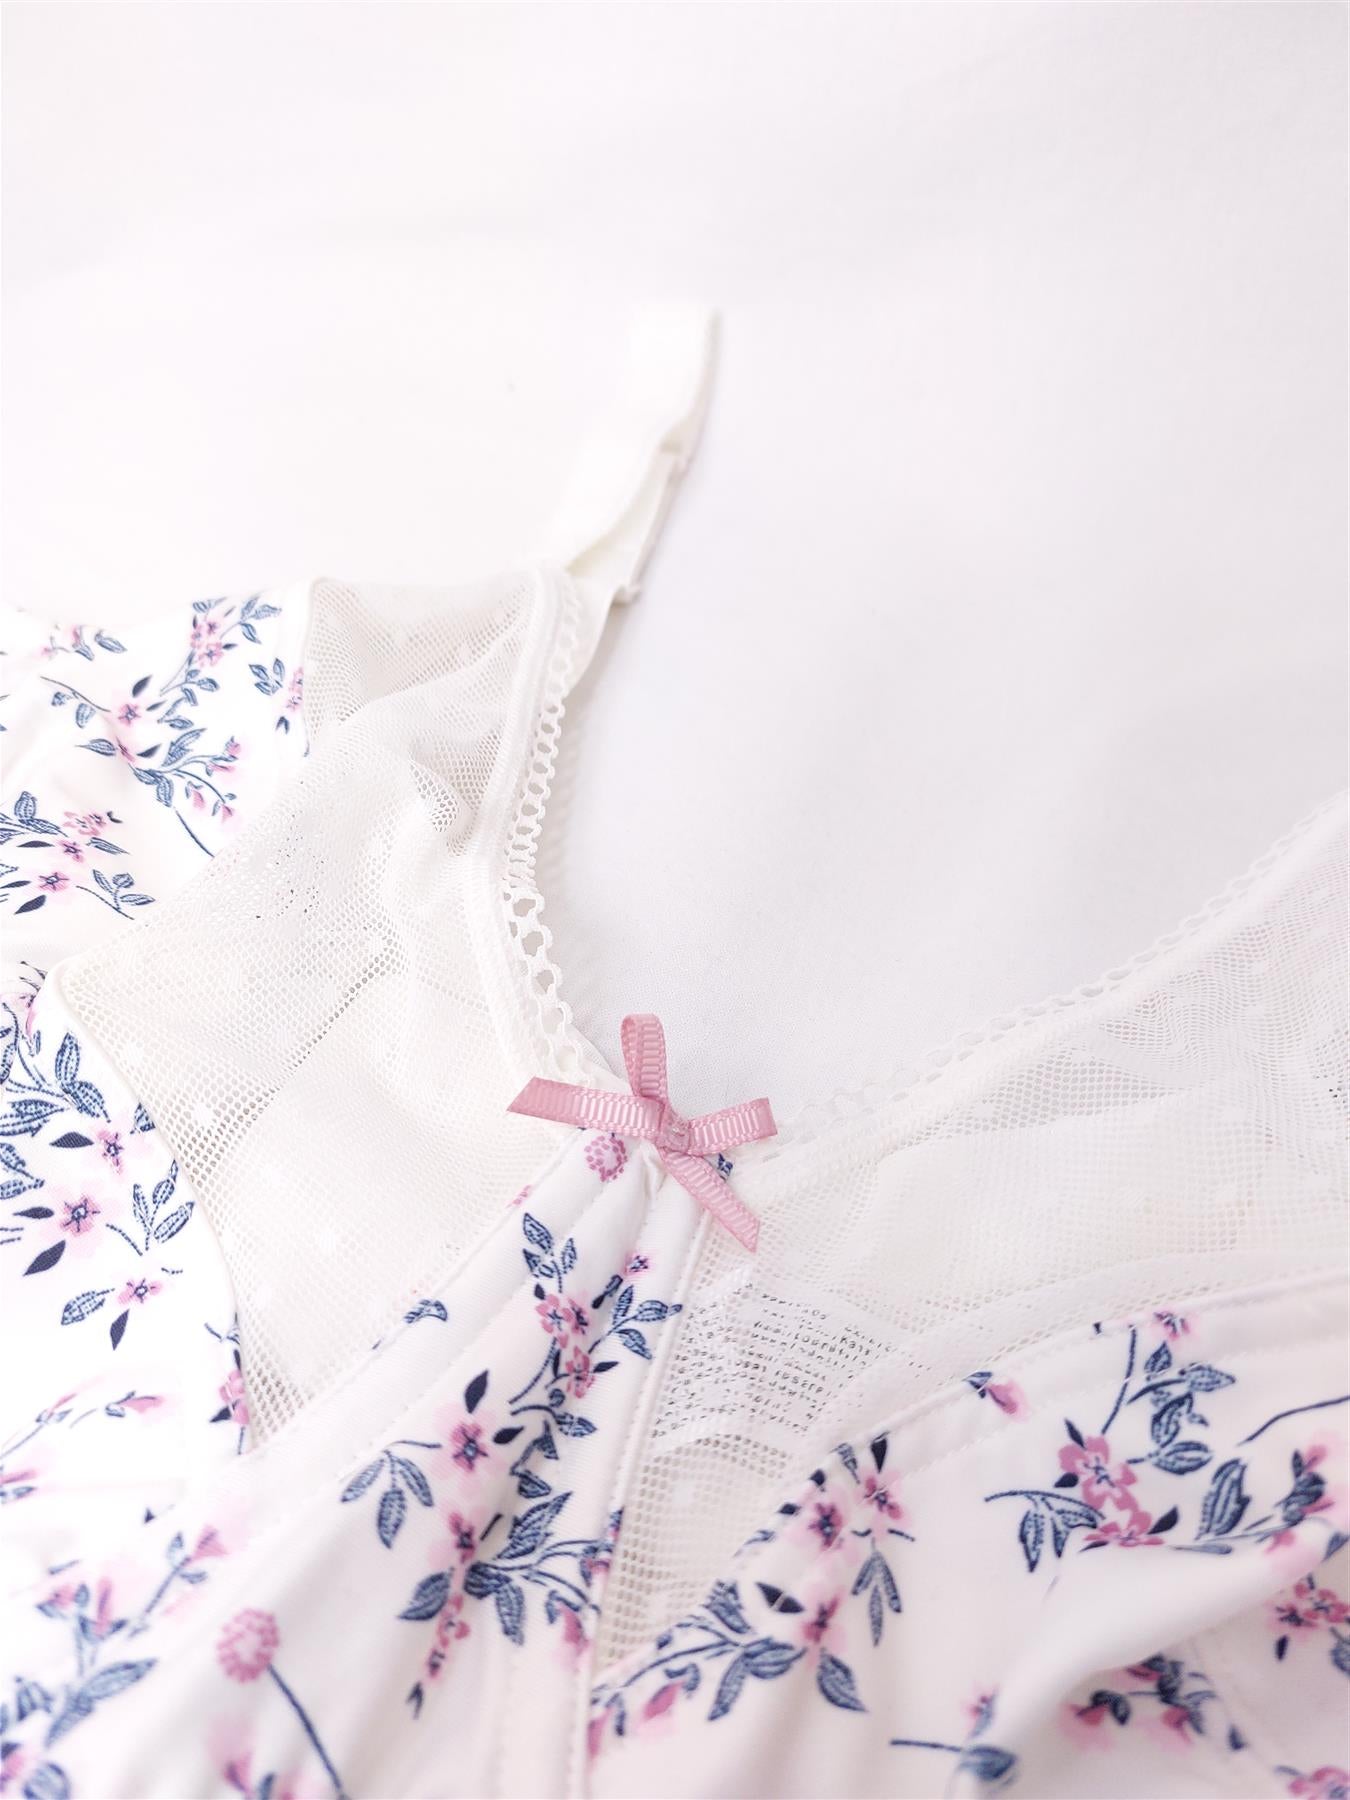 F&F Total Support Bra Underwired Non-Padded Mesh White Floral Shop Soiled 40G